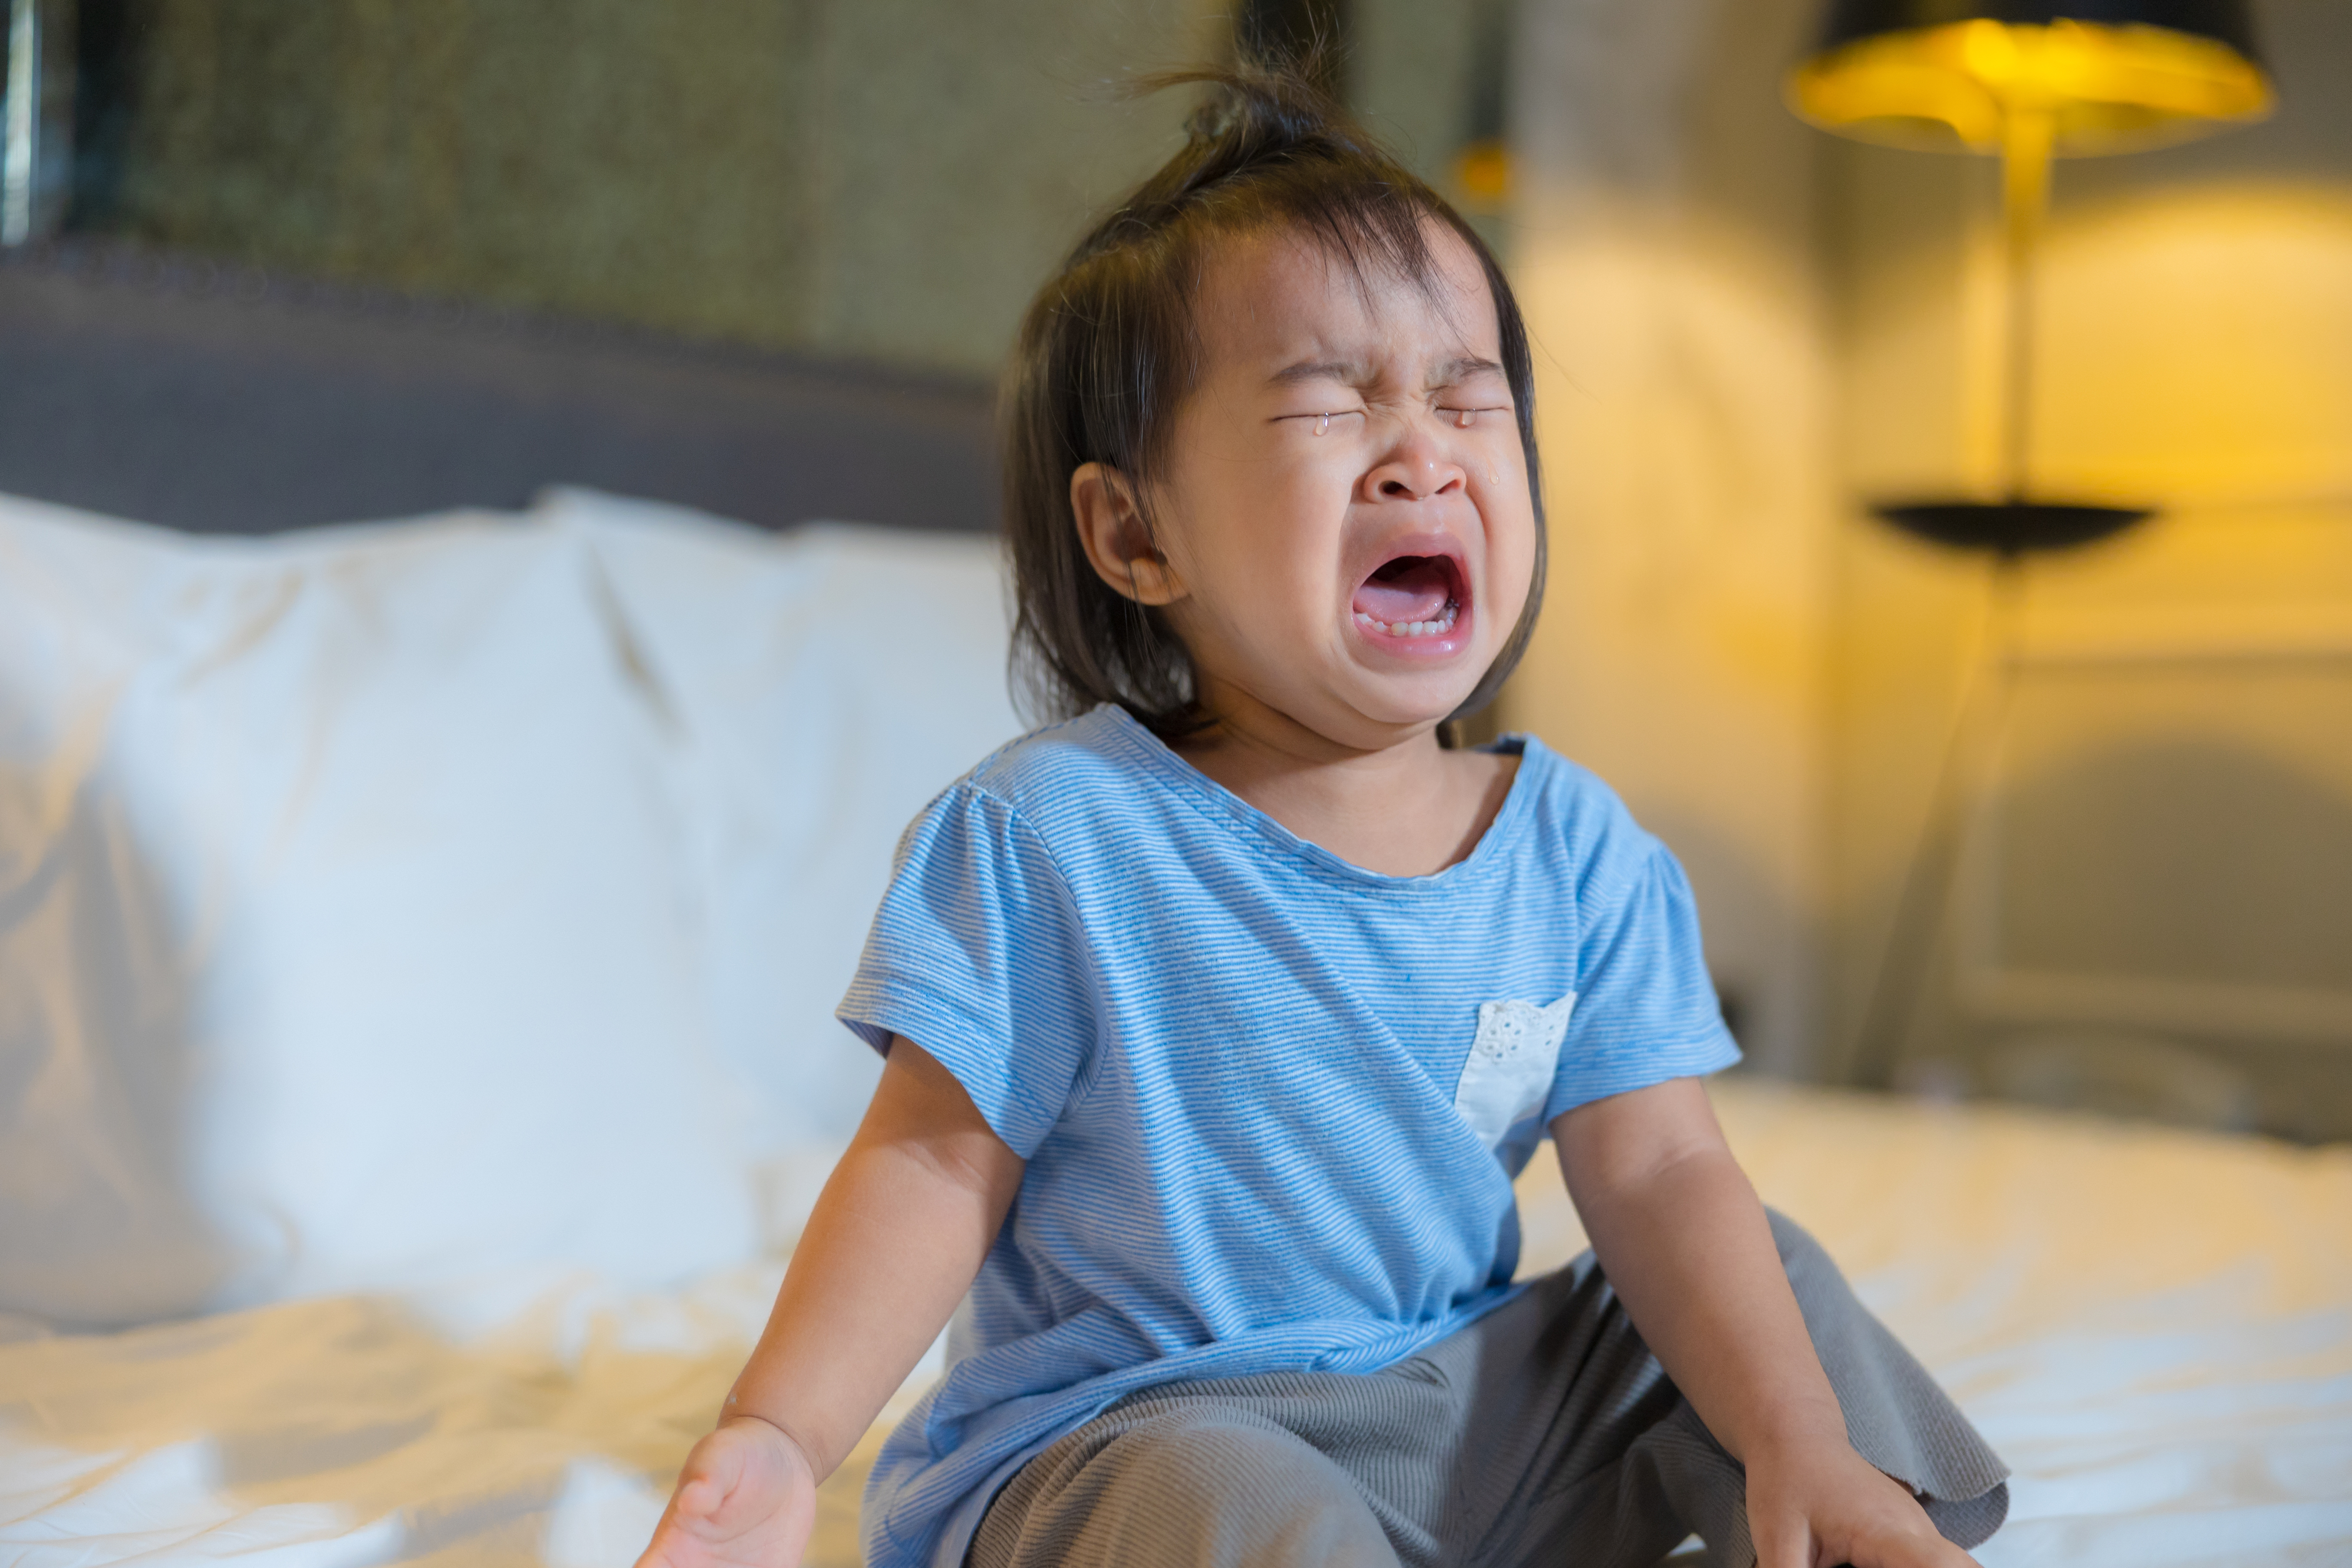 a toddler crying on her bed